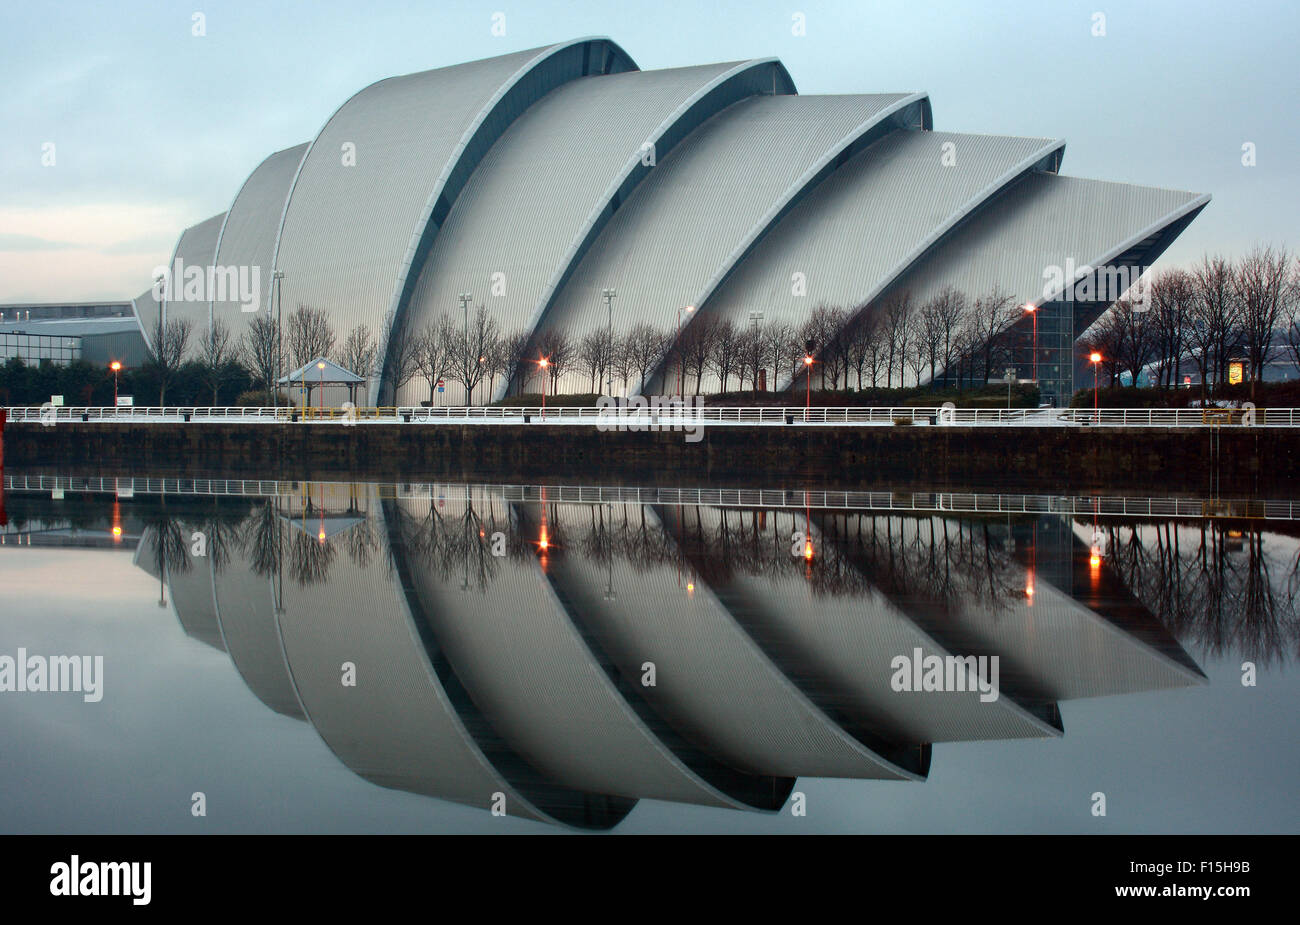 Glasgow Clyde Auditorium, also known as the Armadillo by the River Clyde before Sunset Stock Photo